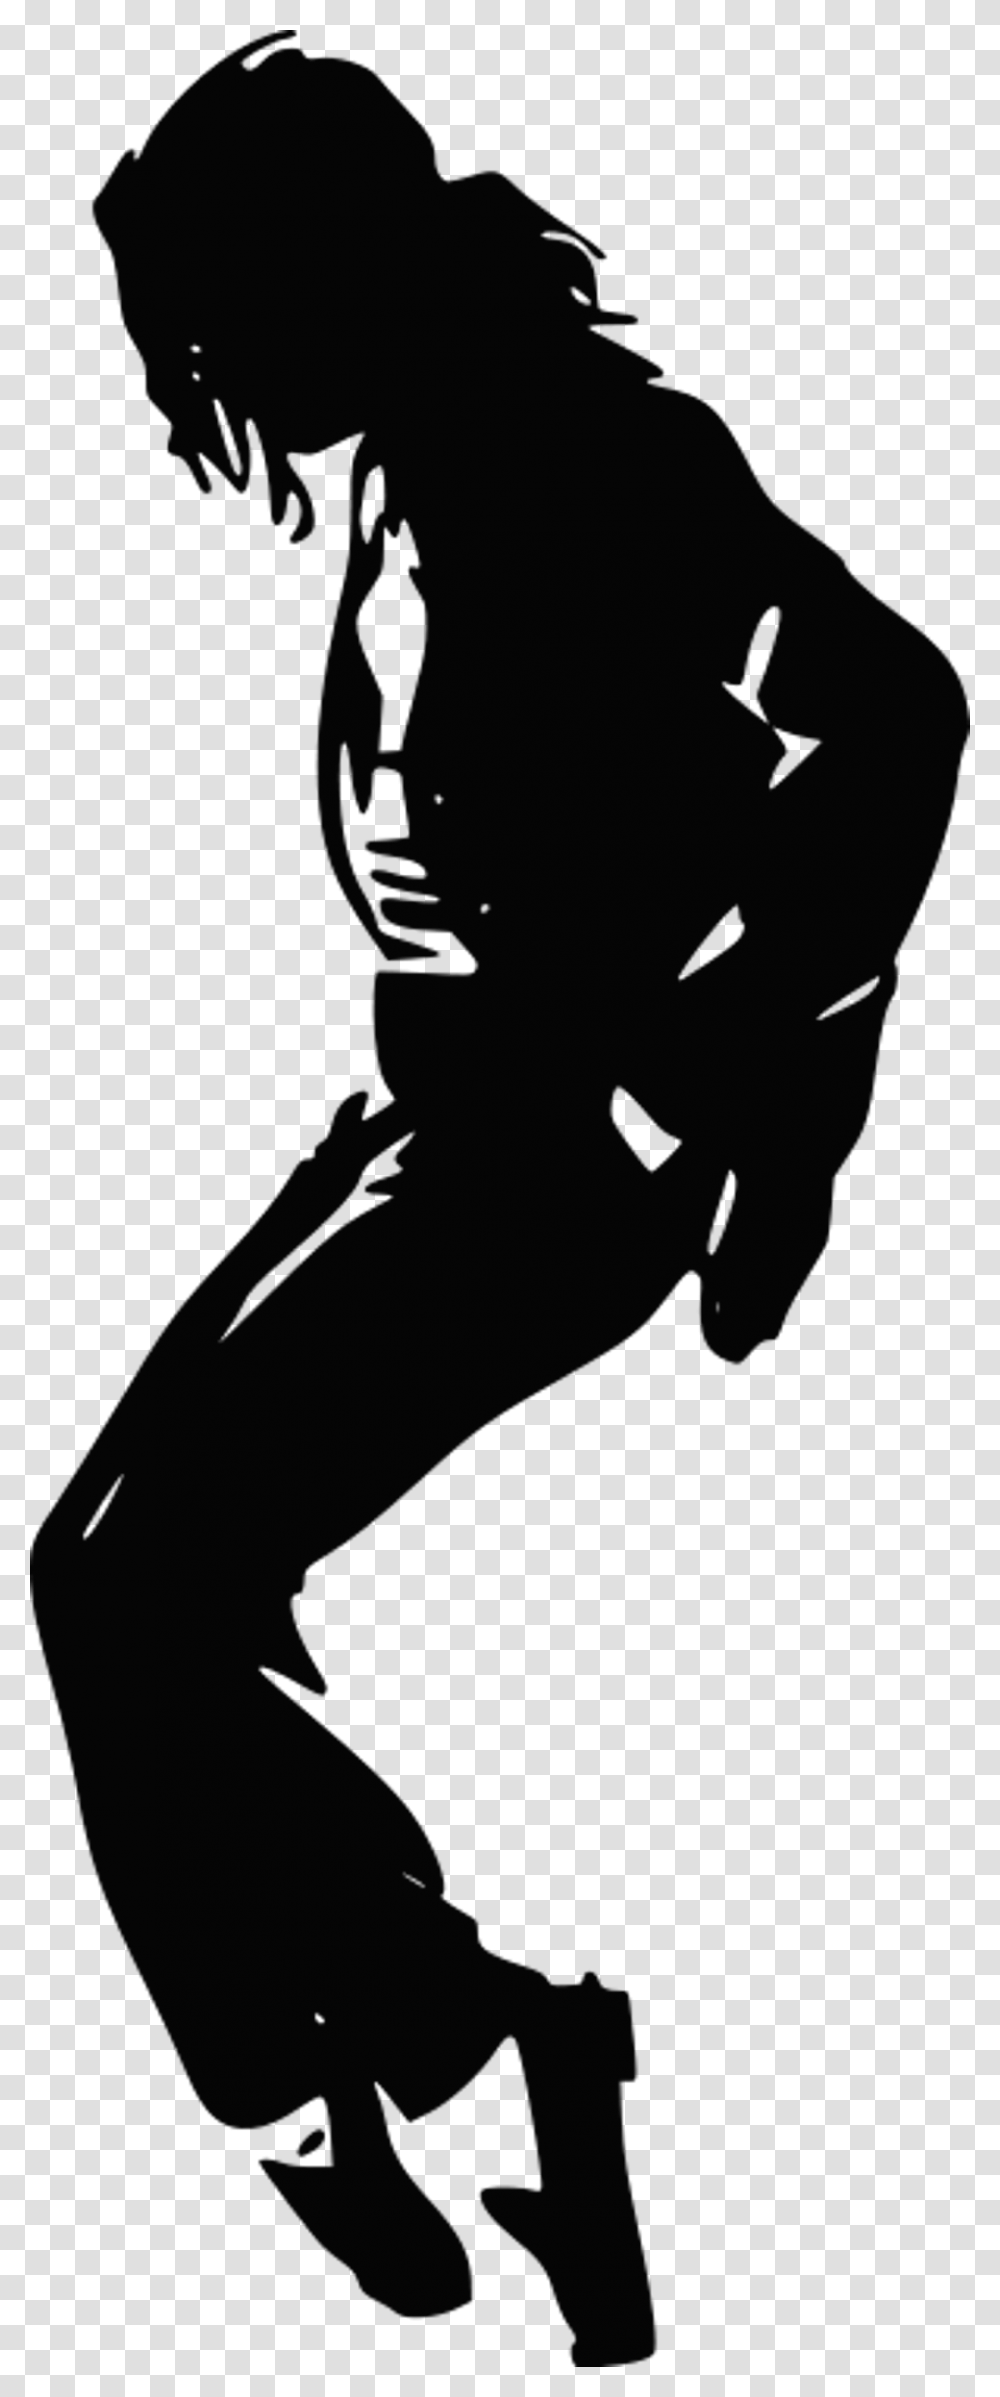 Moonwalk Silhouette King Of Pop Clip Art Michael Jackson Painting Black And White, Person, Kneeling, Photography, Portrait Transparent Png